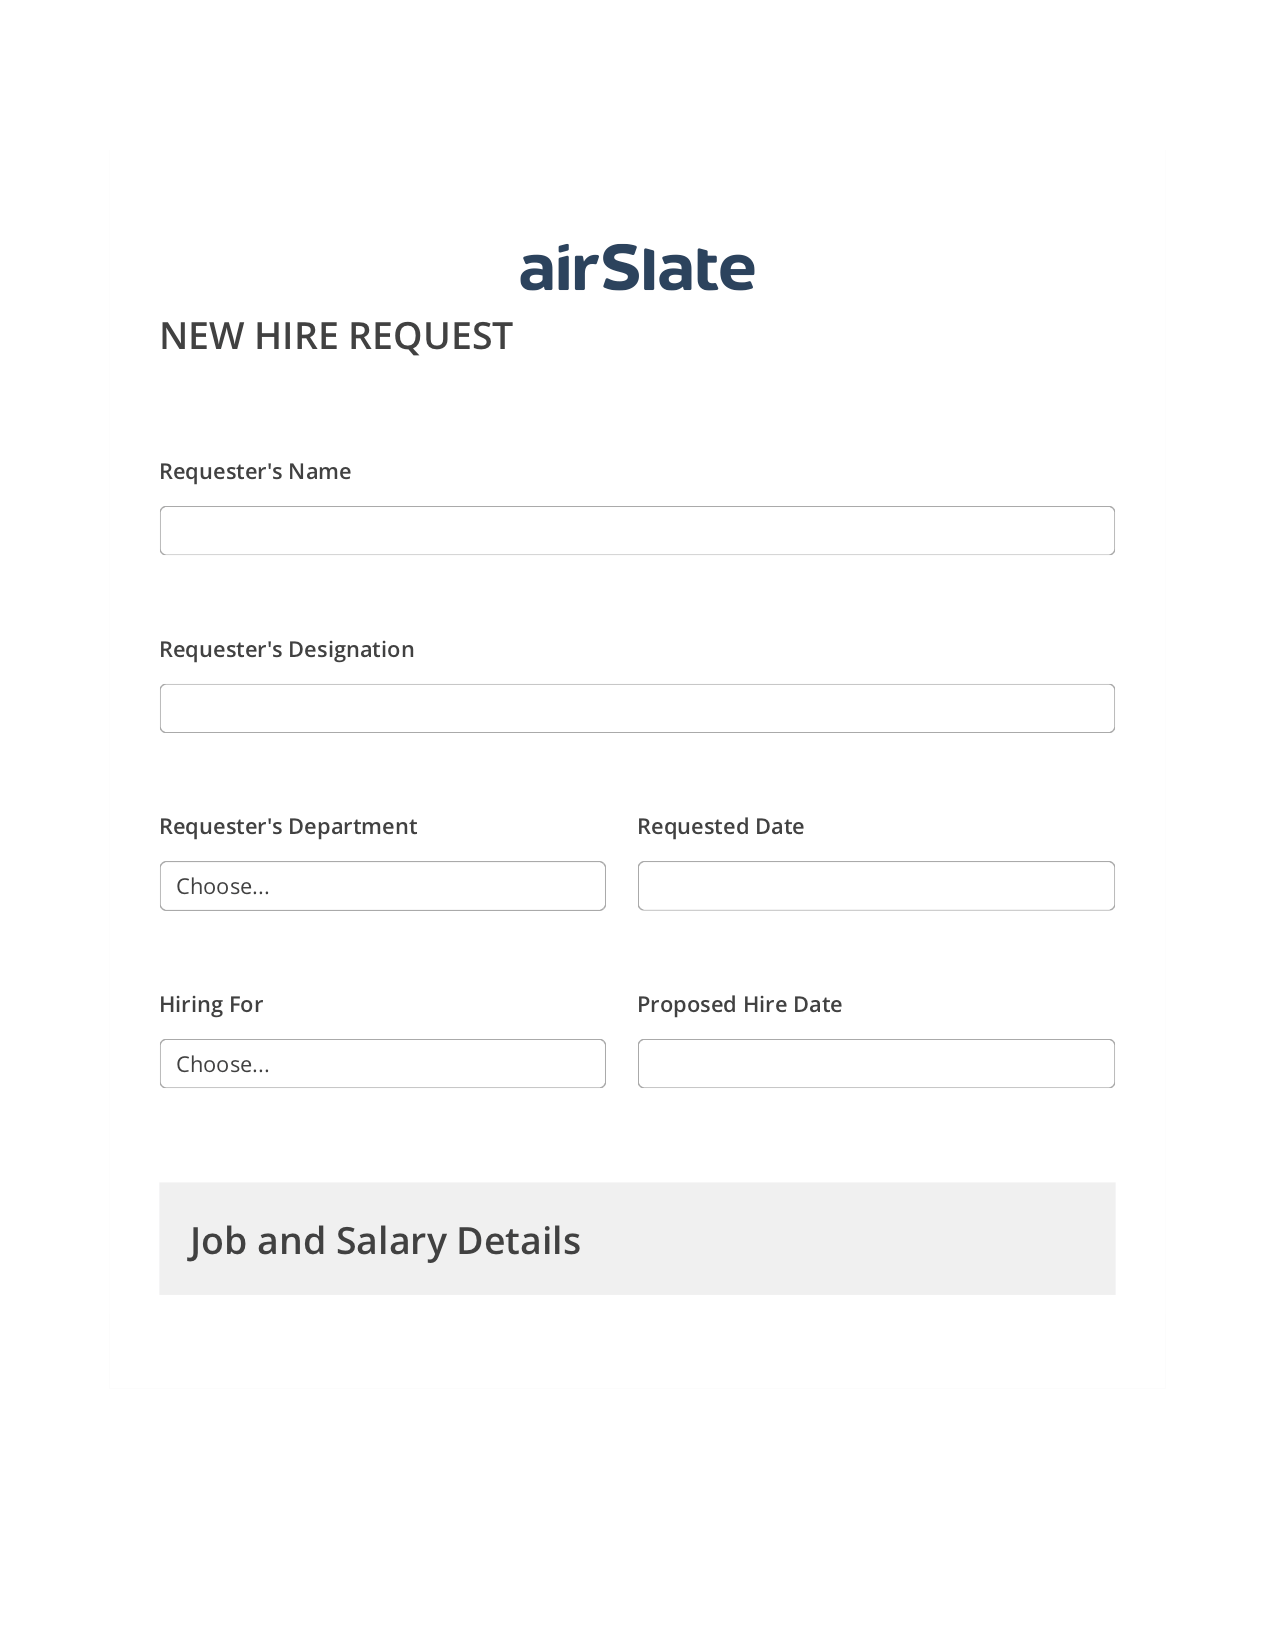 Hiring Request Workflow Pre-fill from CSV File Bot, Rename Slate Bot, Webhook Postfinish Bot